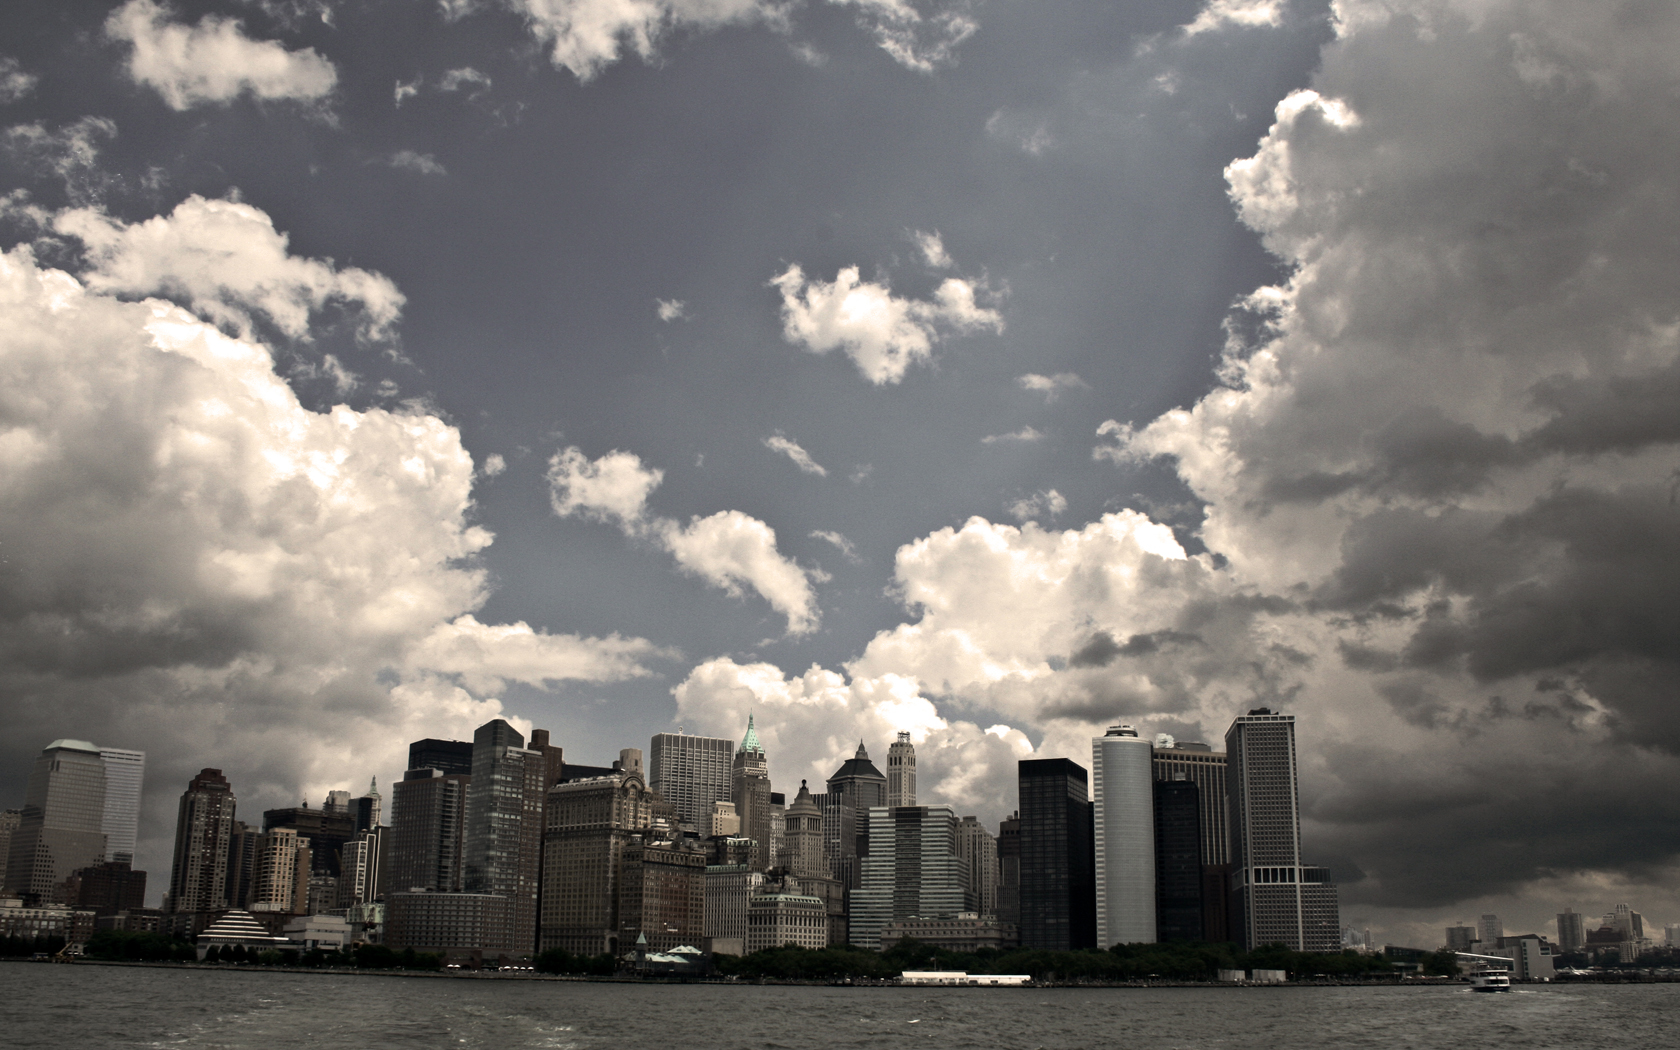 Looking across the Hudson River towards lower Manhattan cityscape